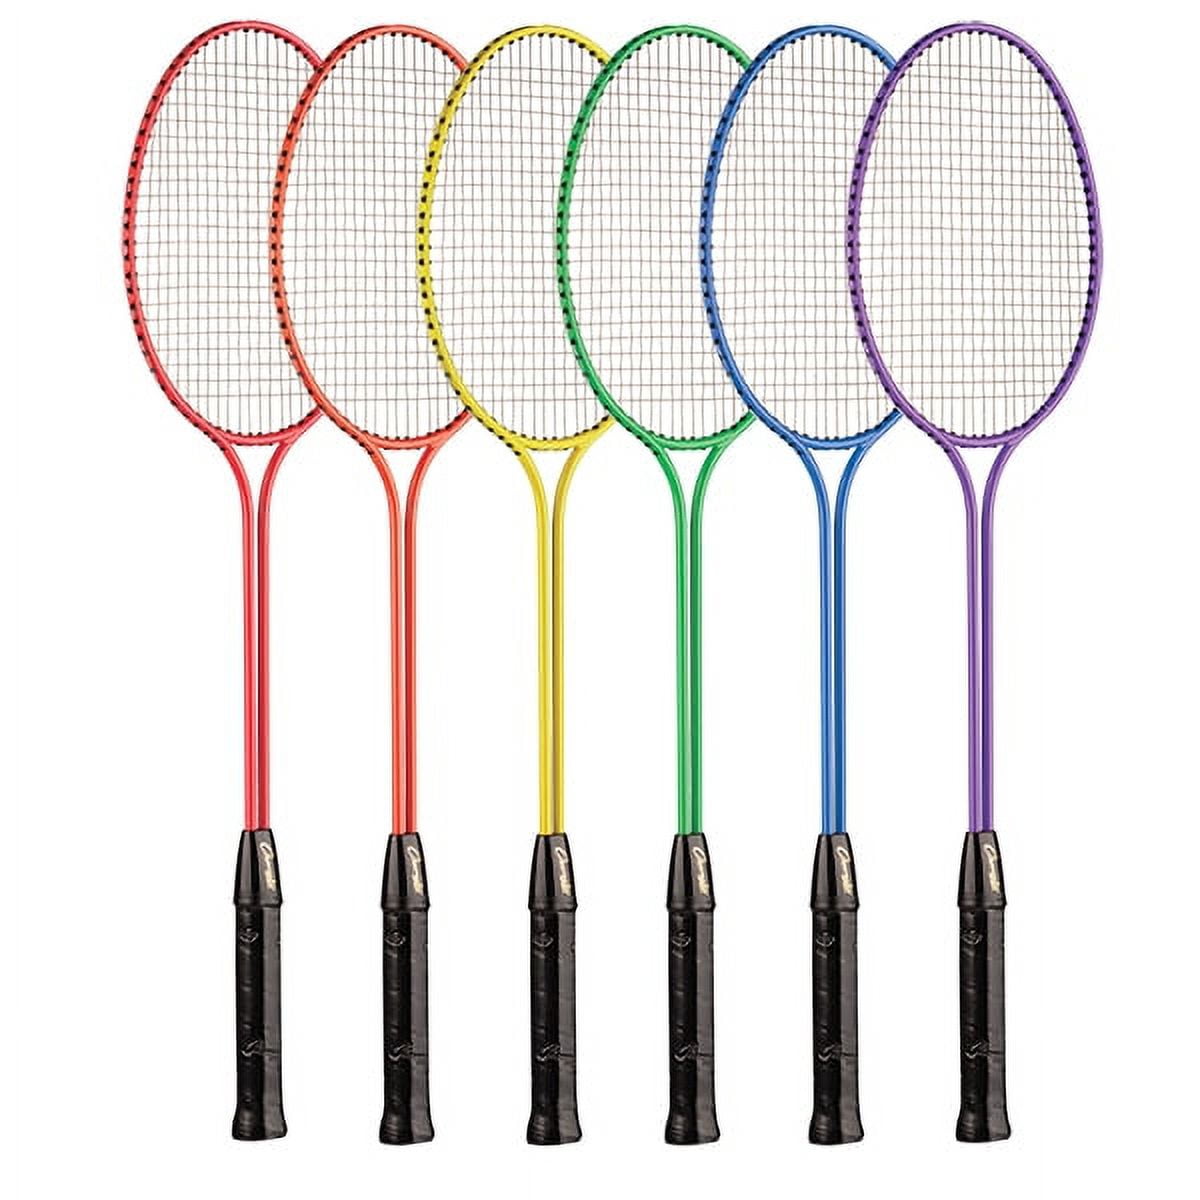 Picture of Champion Sports BR31SET 26 x 8 x 1 in. All Steel Frame Badminton Racket, Assorted Colors